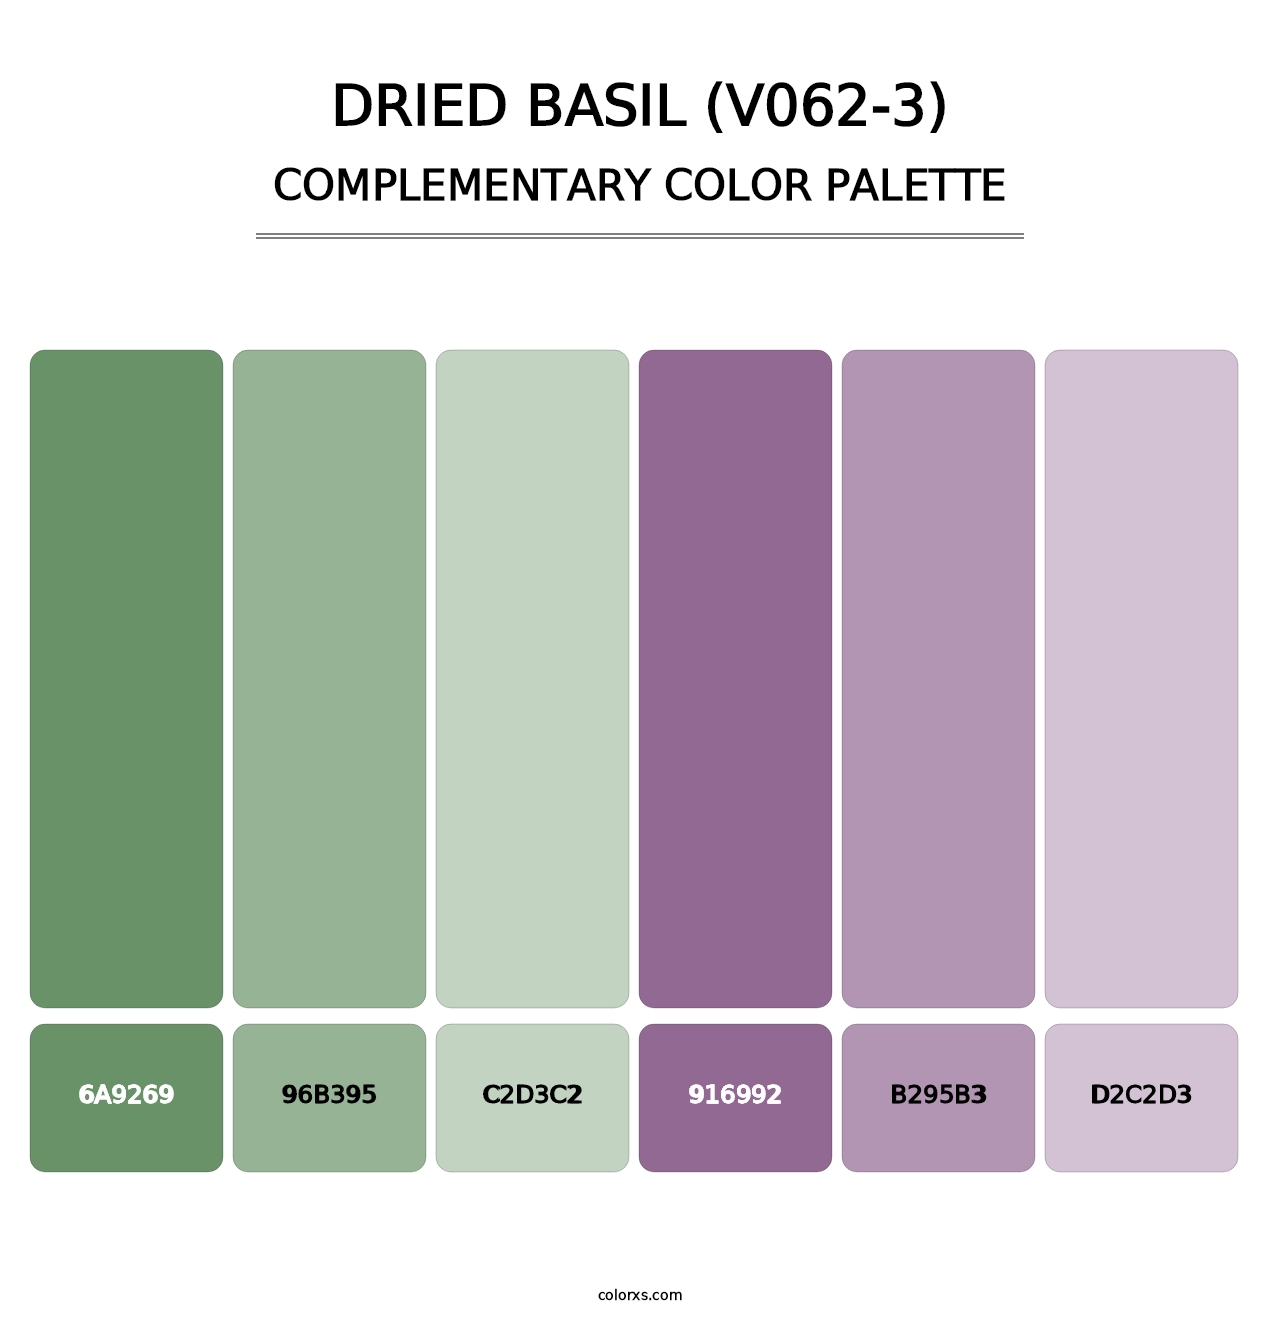 Dried Basil (V062-3) - Complementary Color Palette